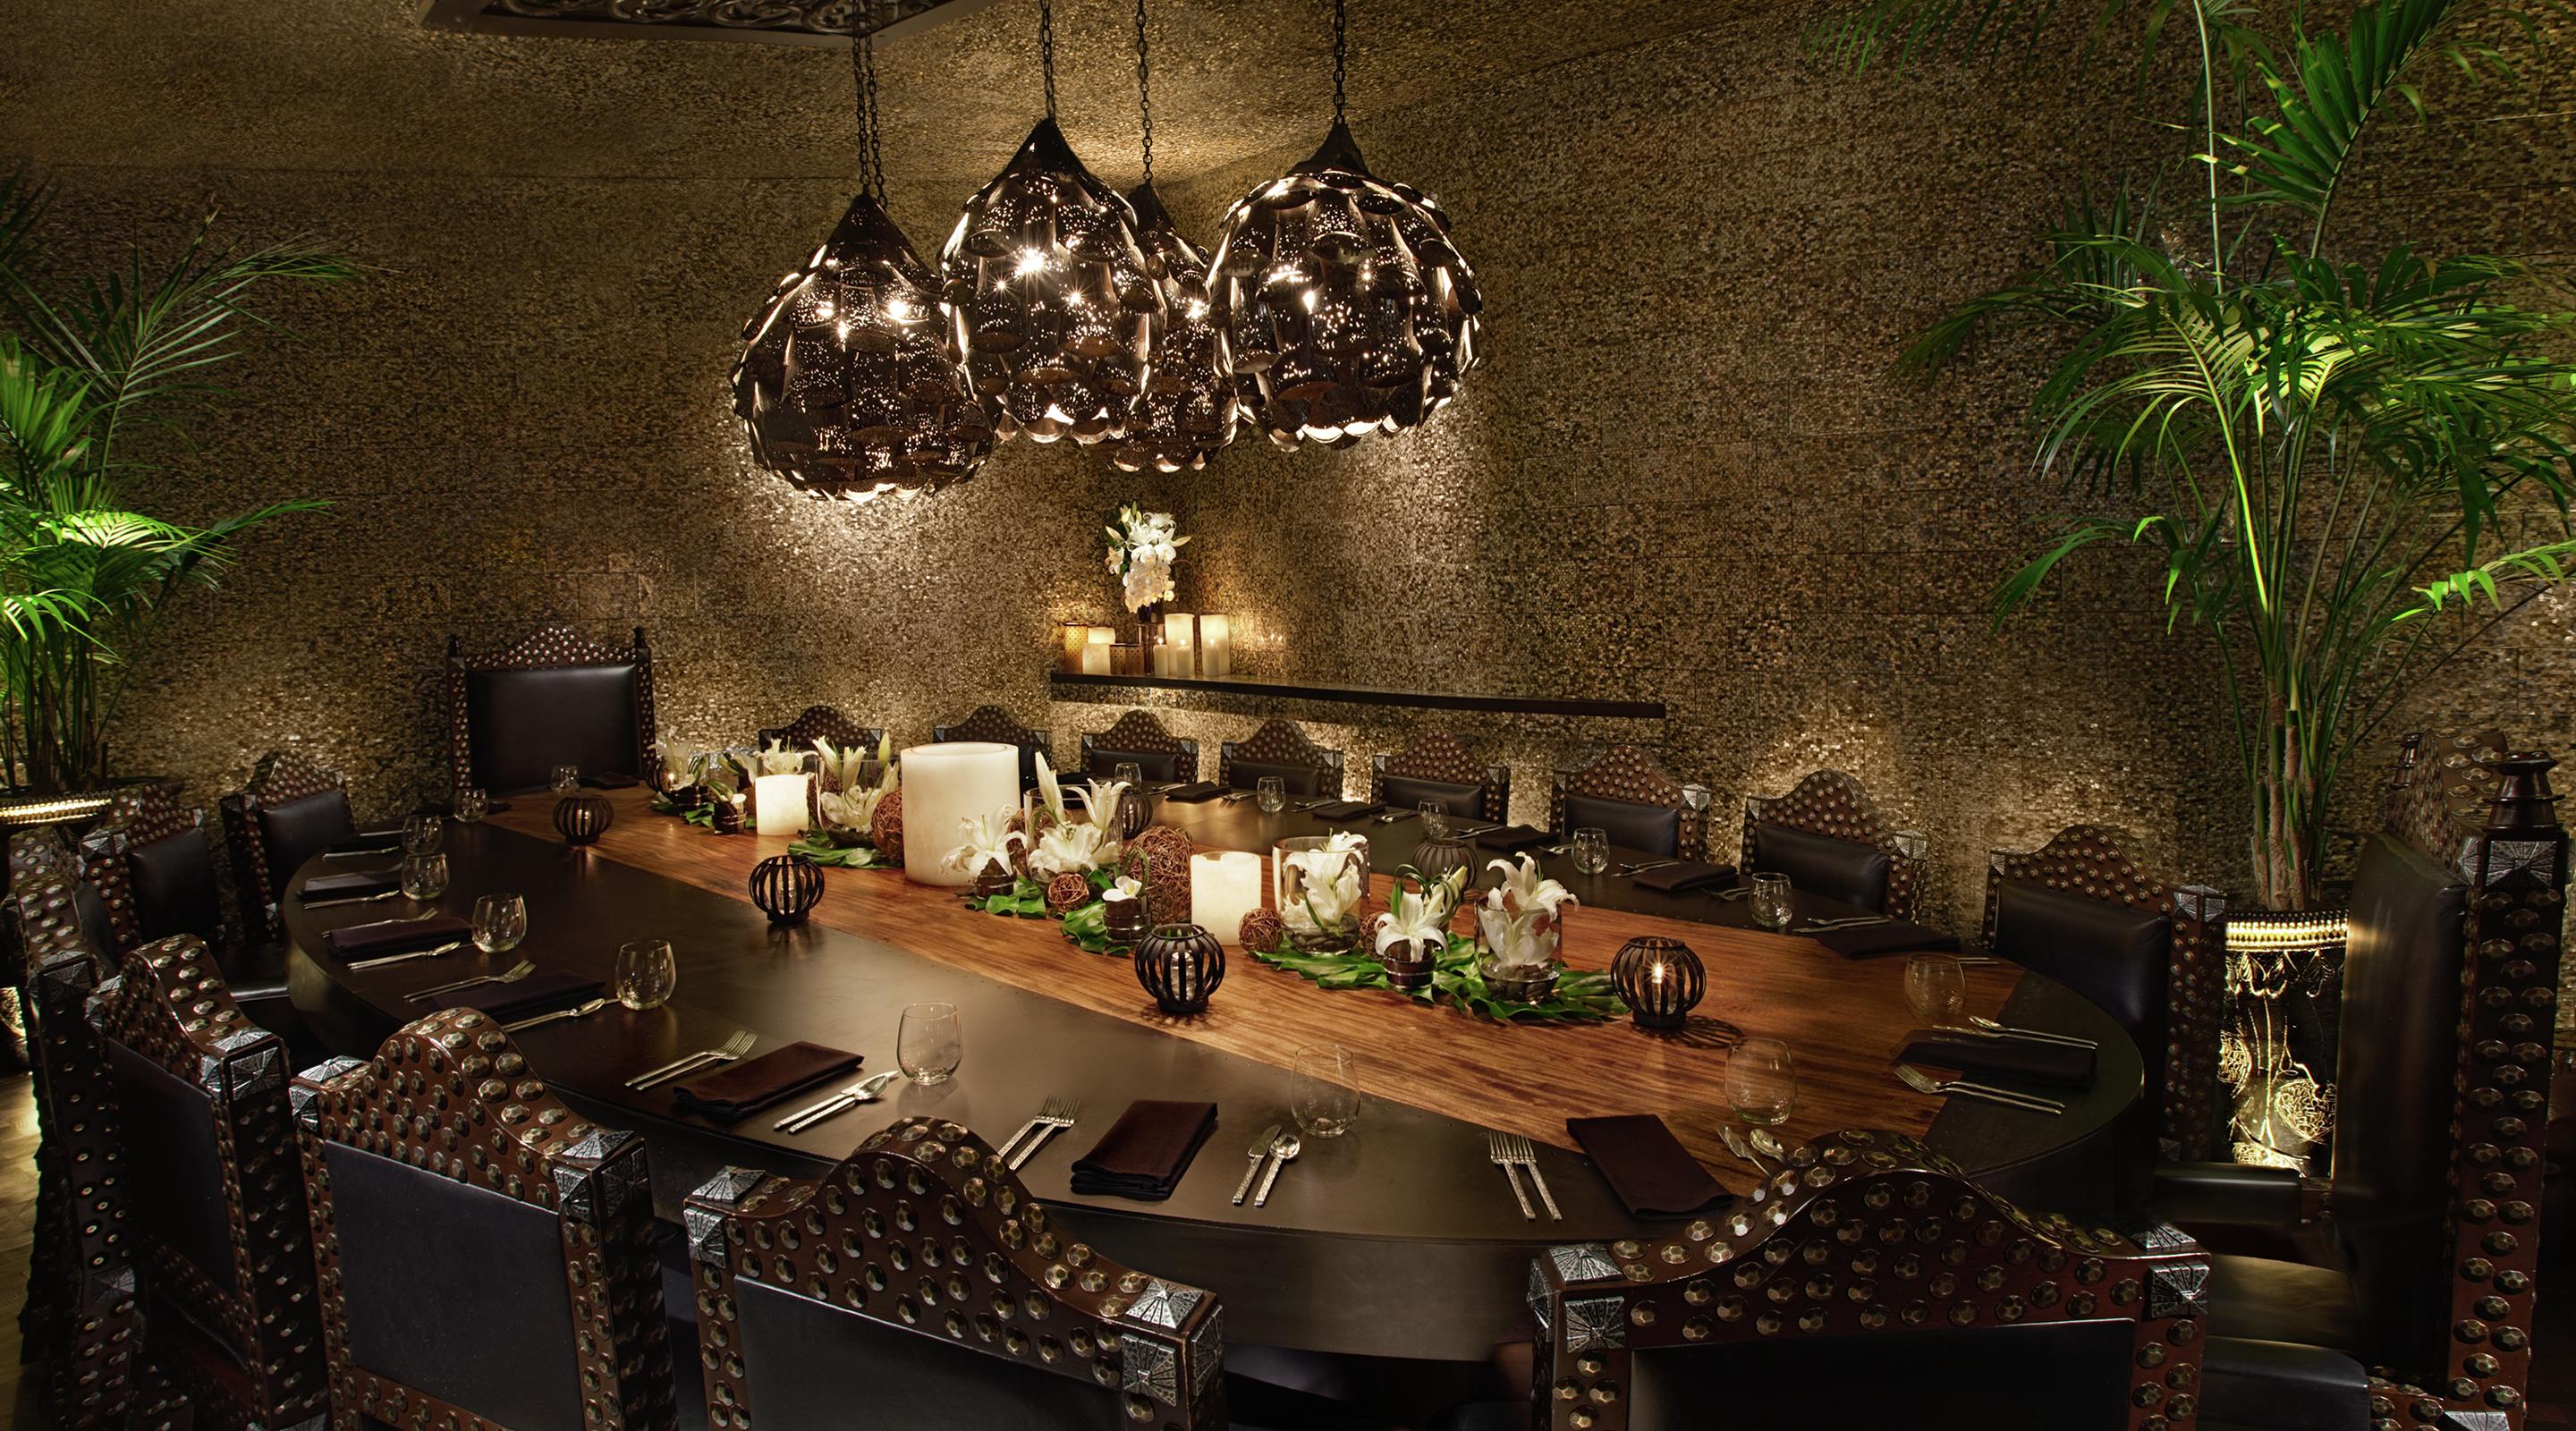 Enjoy Baja specials including selections of seafood, beef, pork, chicken and vegetarian dishes both at the exquisite bar surrounded by dozens of the world's finest tequilas and in the main dining room featuring a chainsaw wood carving highlighting the Aztec civilization.